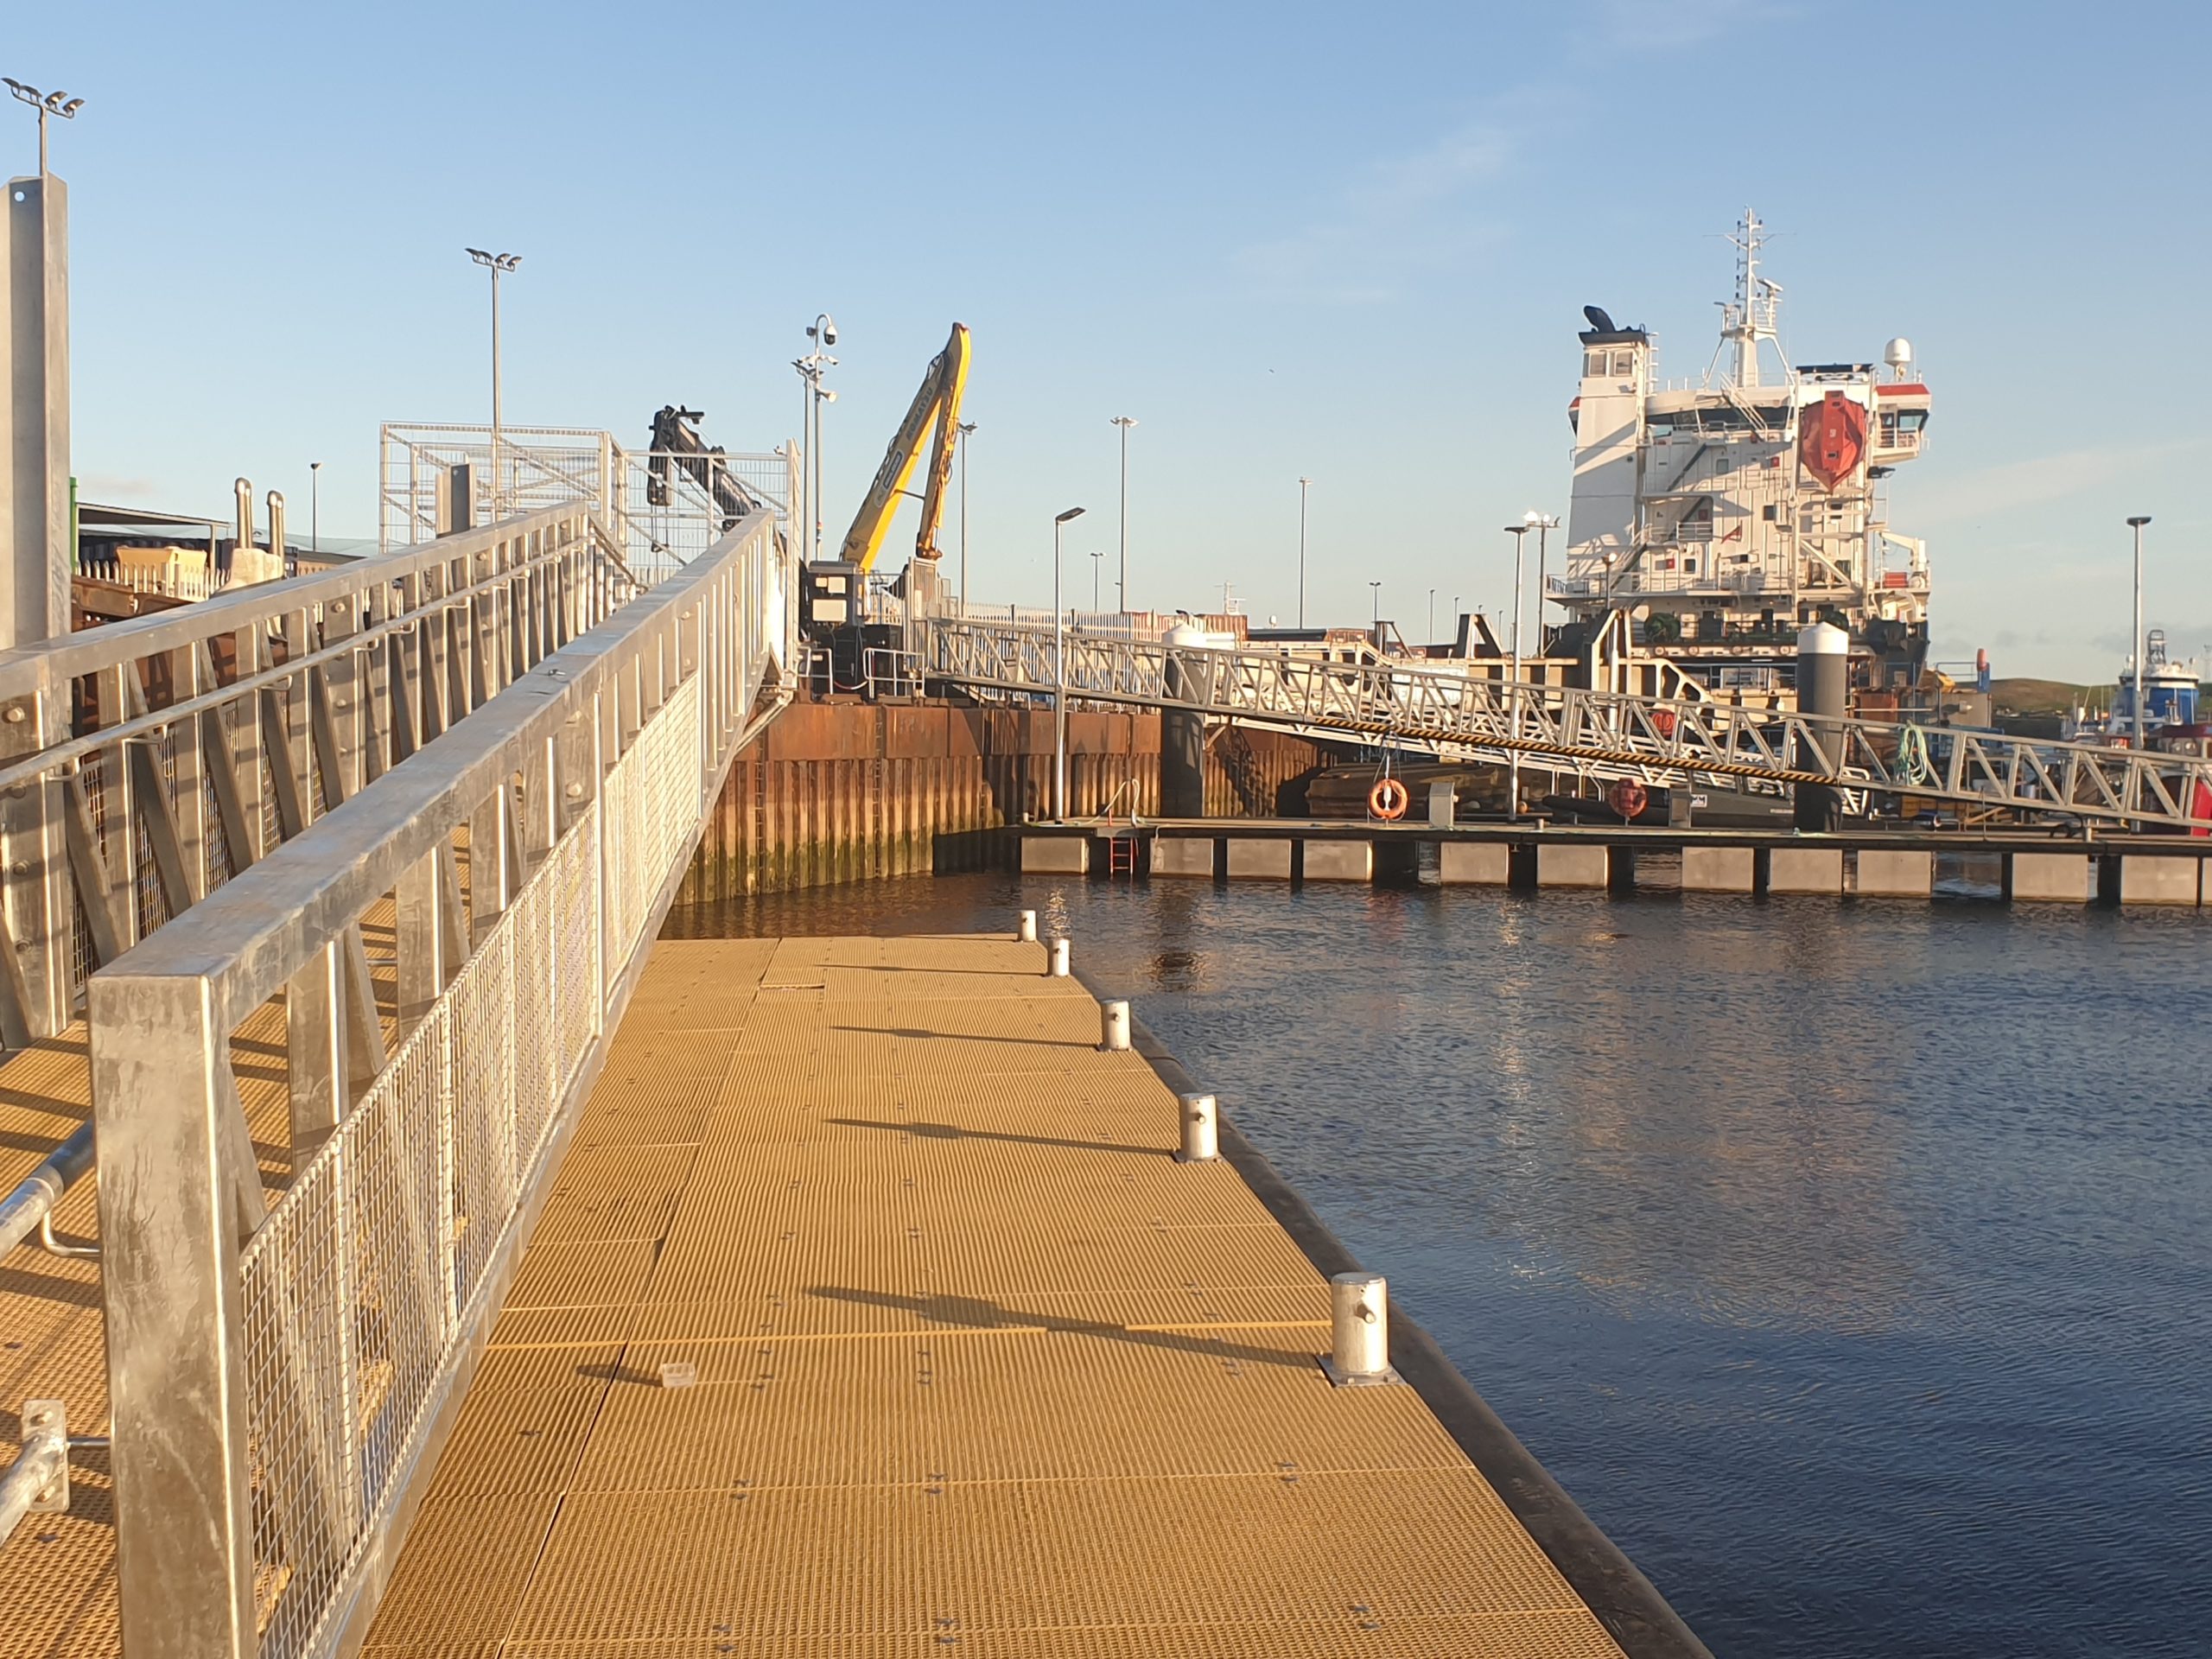 Pontoon berth with gangway with large ship in the background